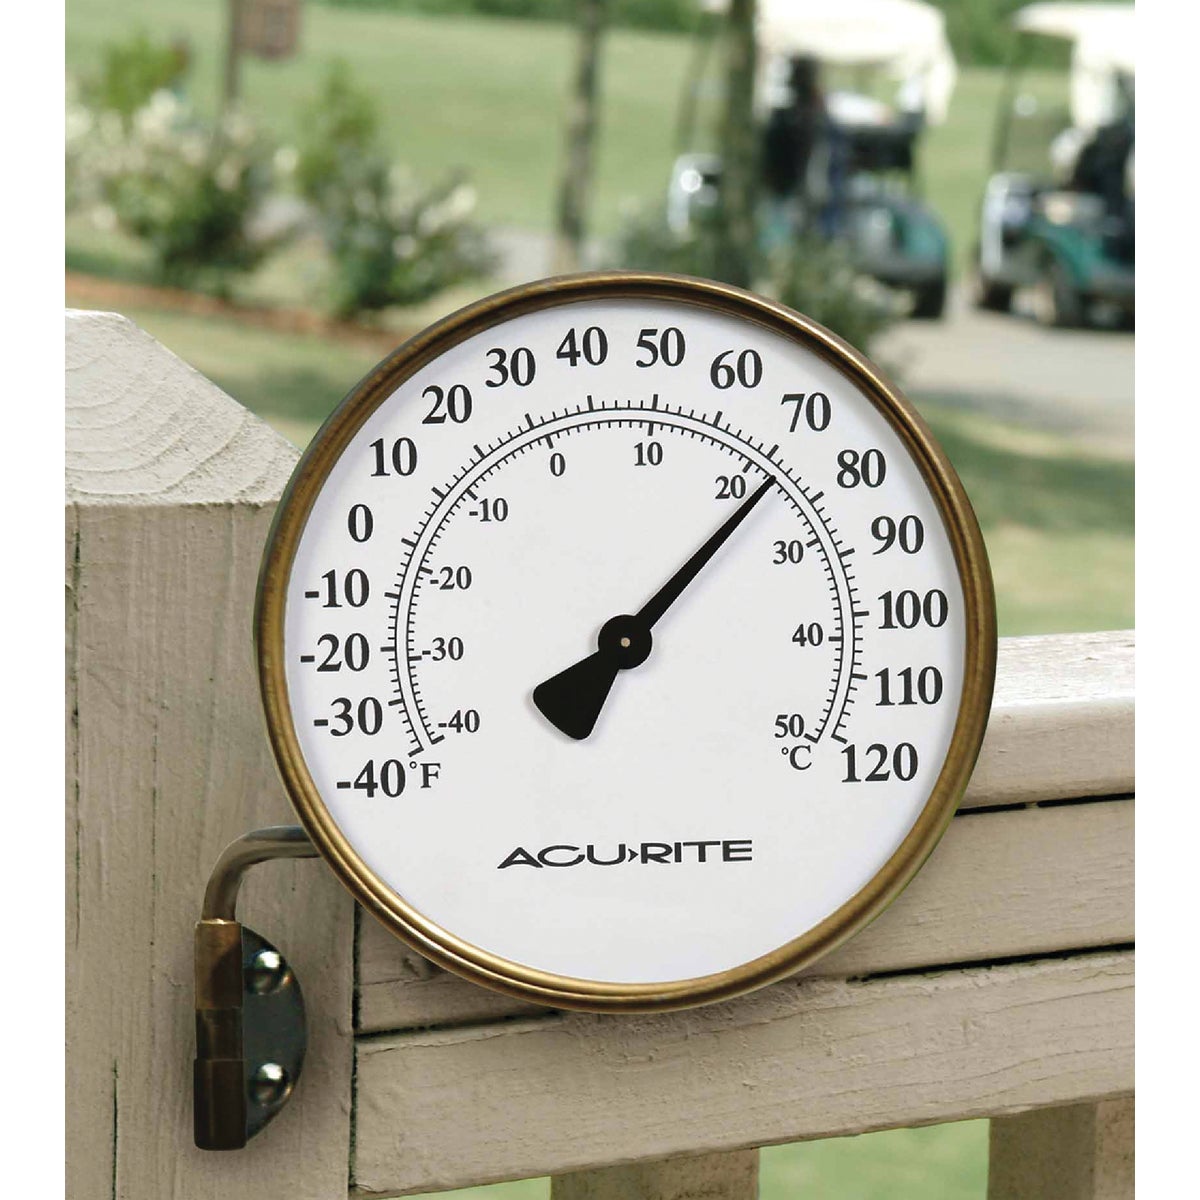 Item 651618, Indoor and outdoor decorative metal thermometer is a high-quality 